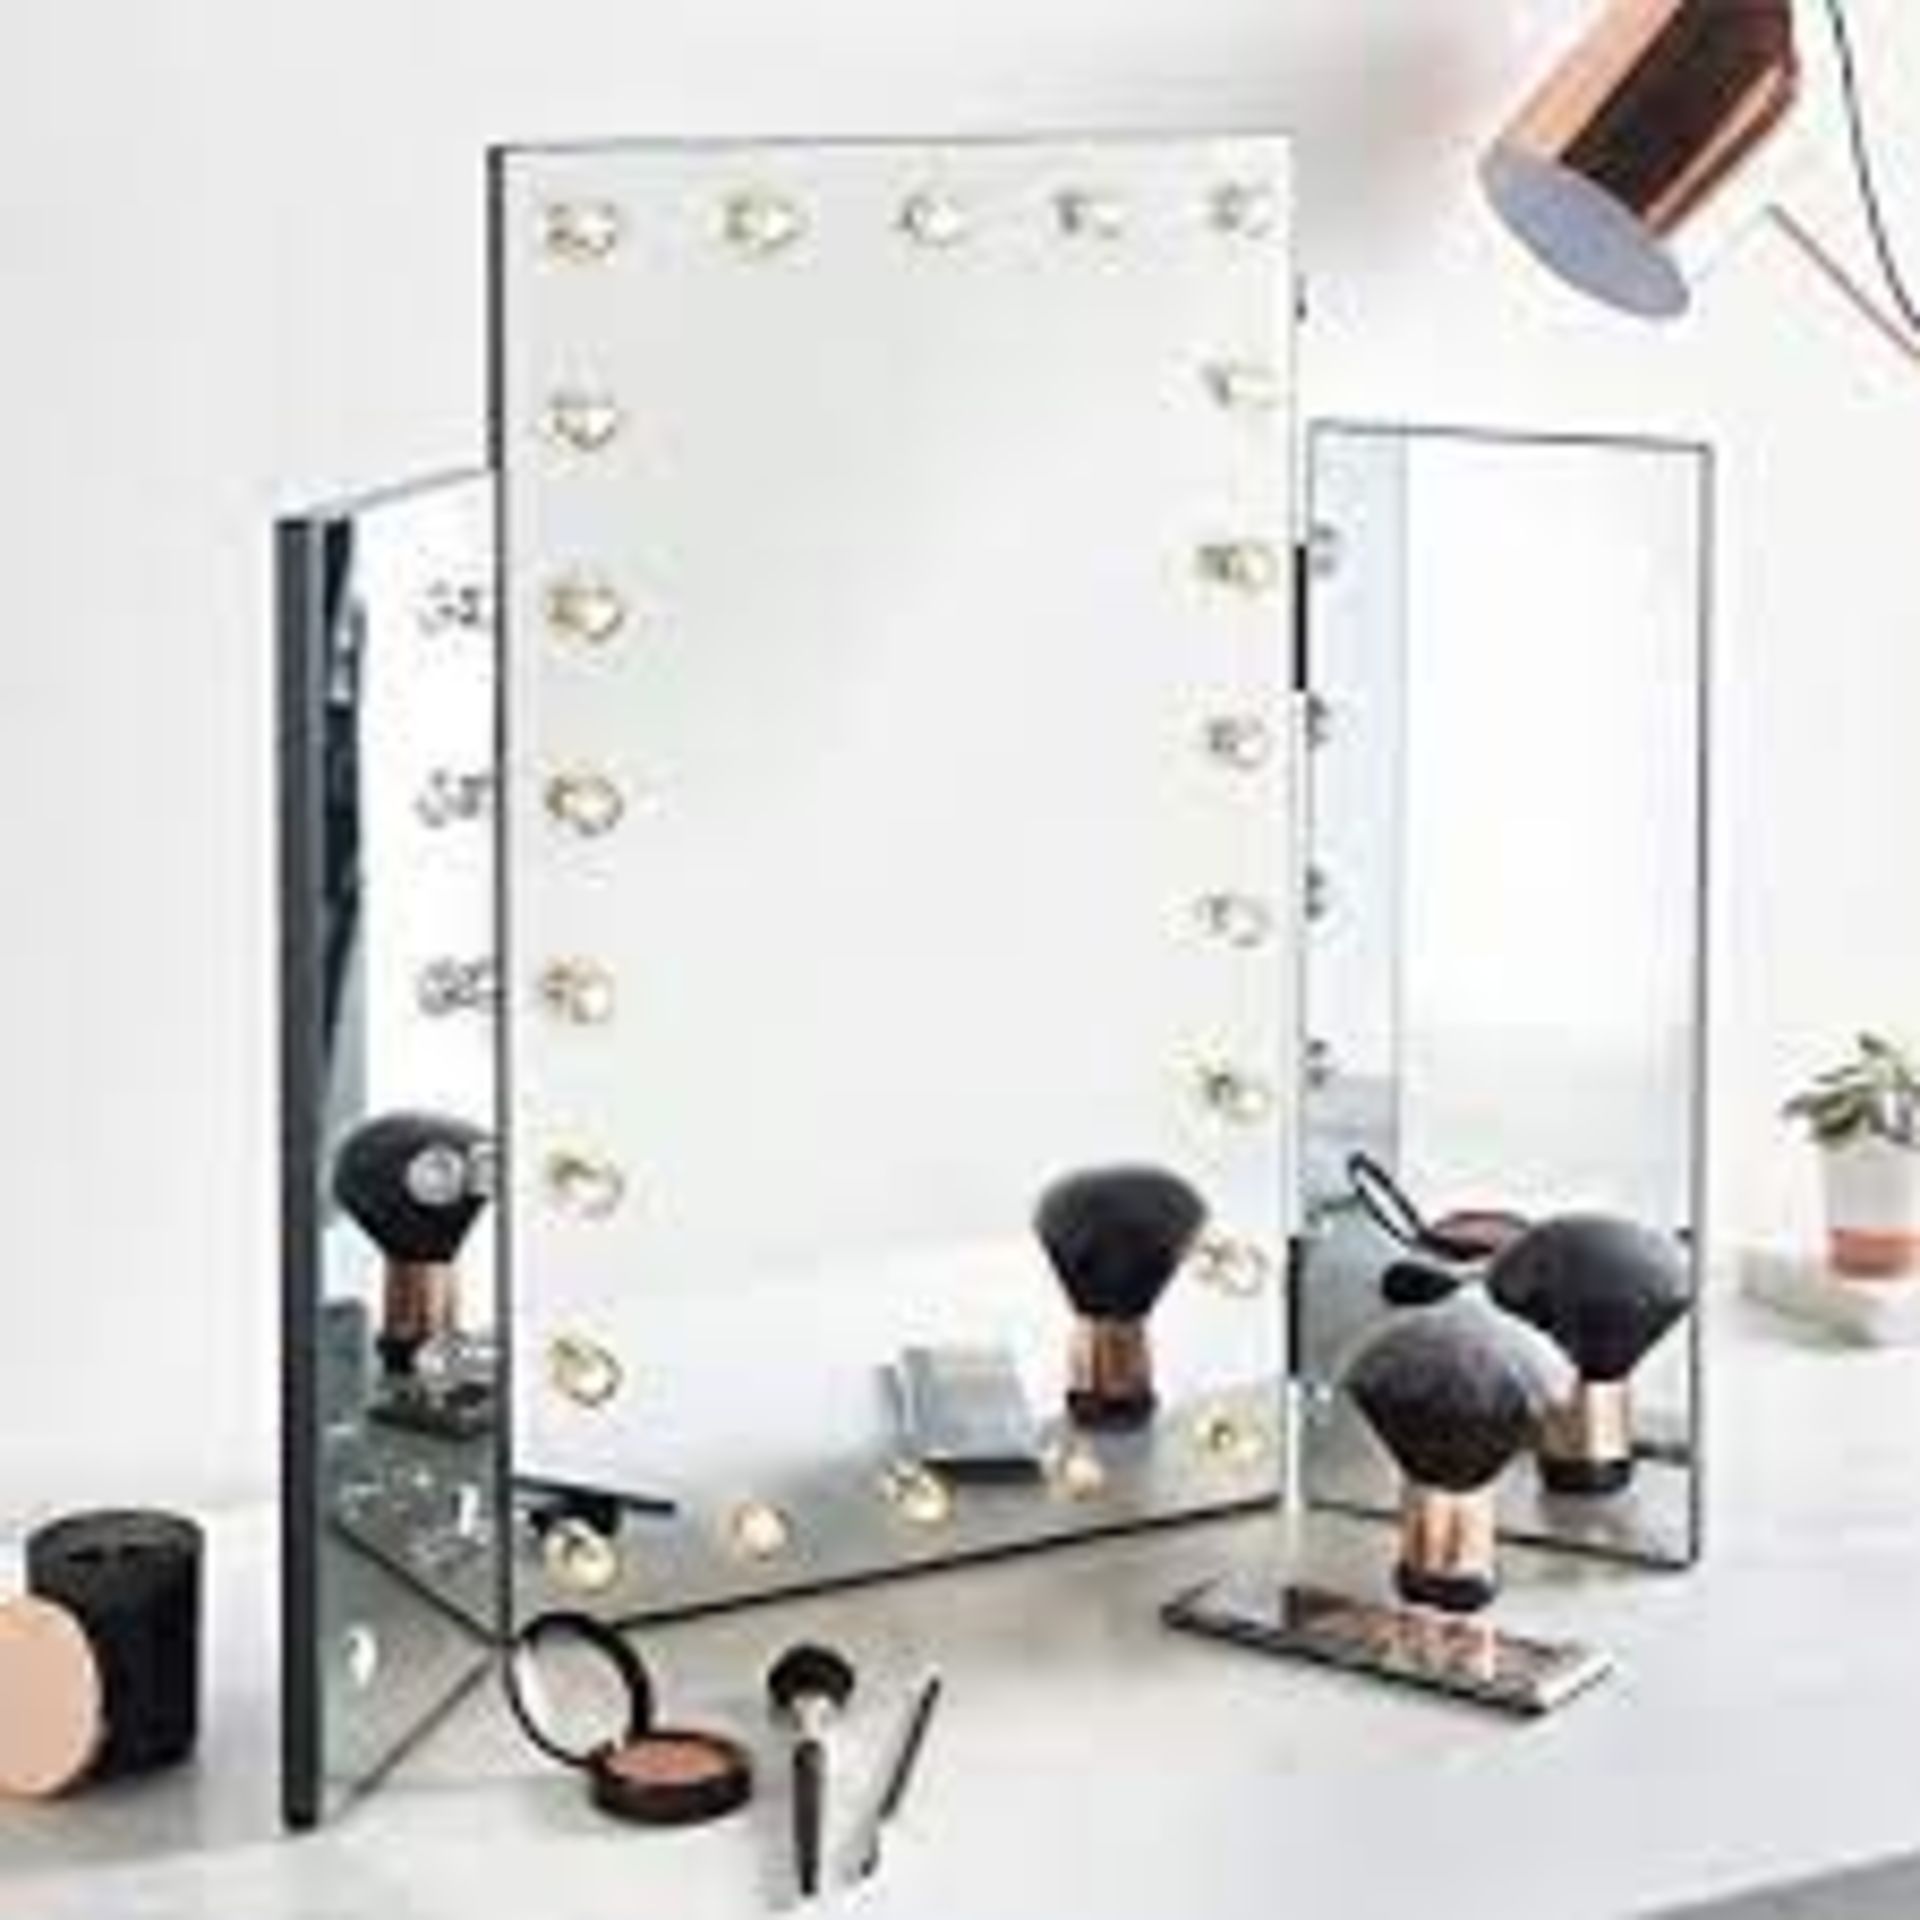 NEW BOXED Hollywood Mirror With LED Lights Vanity Beauty Makeup Mirror For Dressing Table Tri-Fold 3